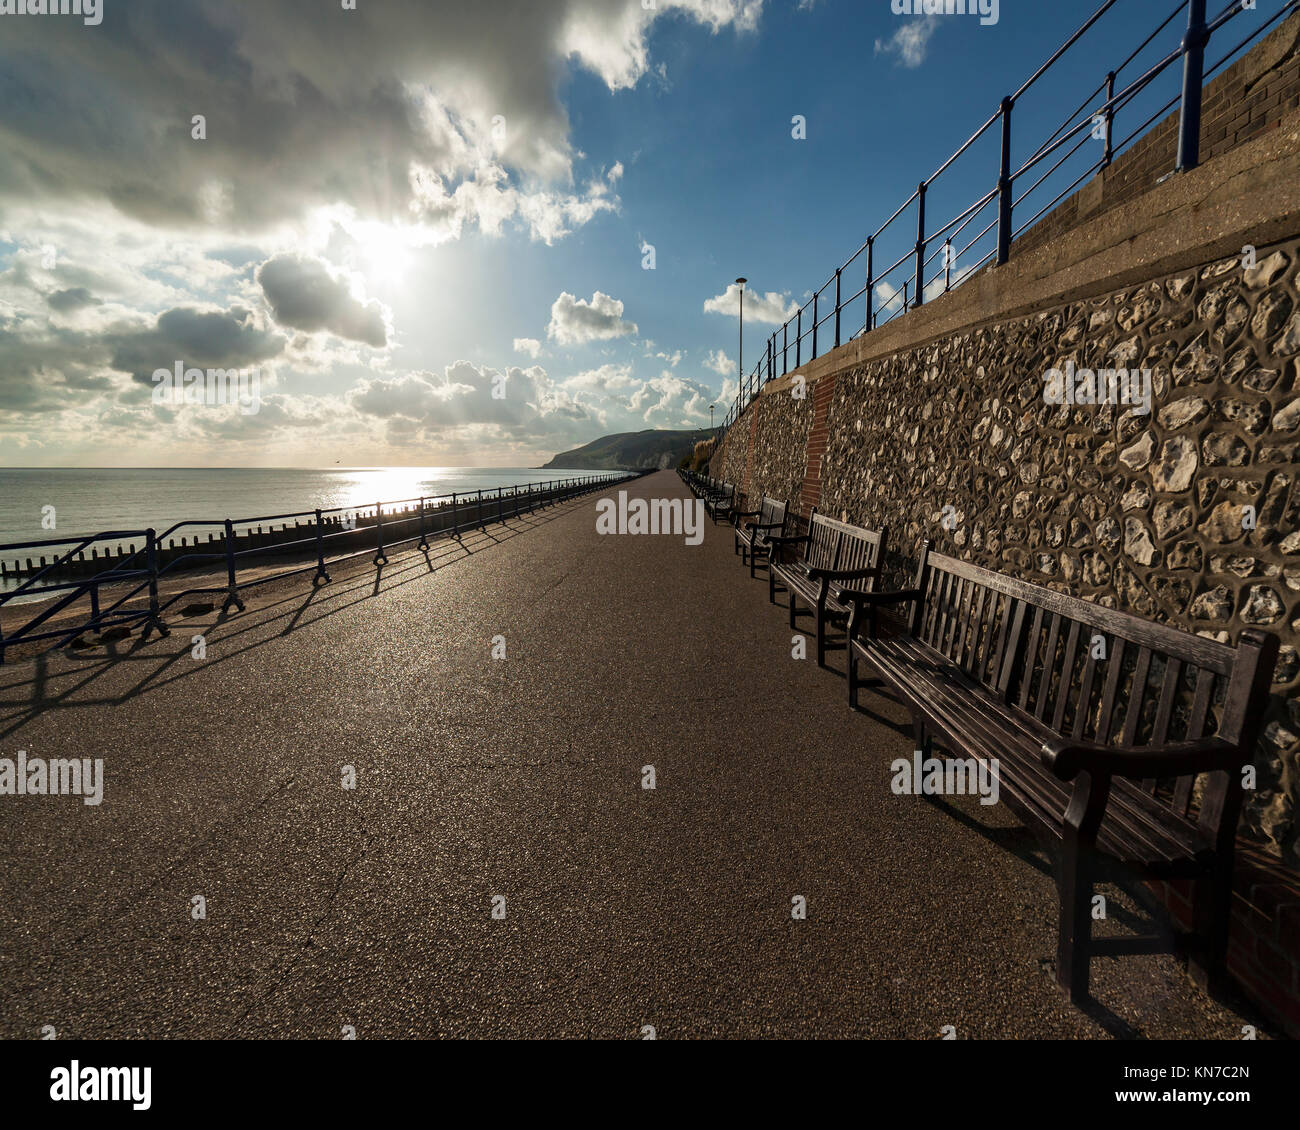 Seaside promenade with benches Stock Photo